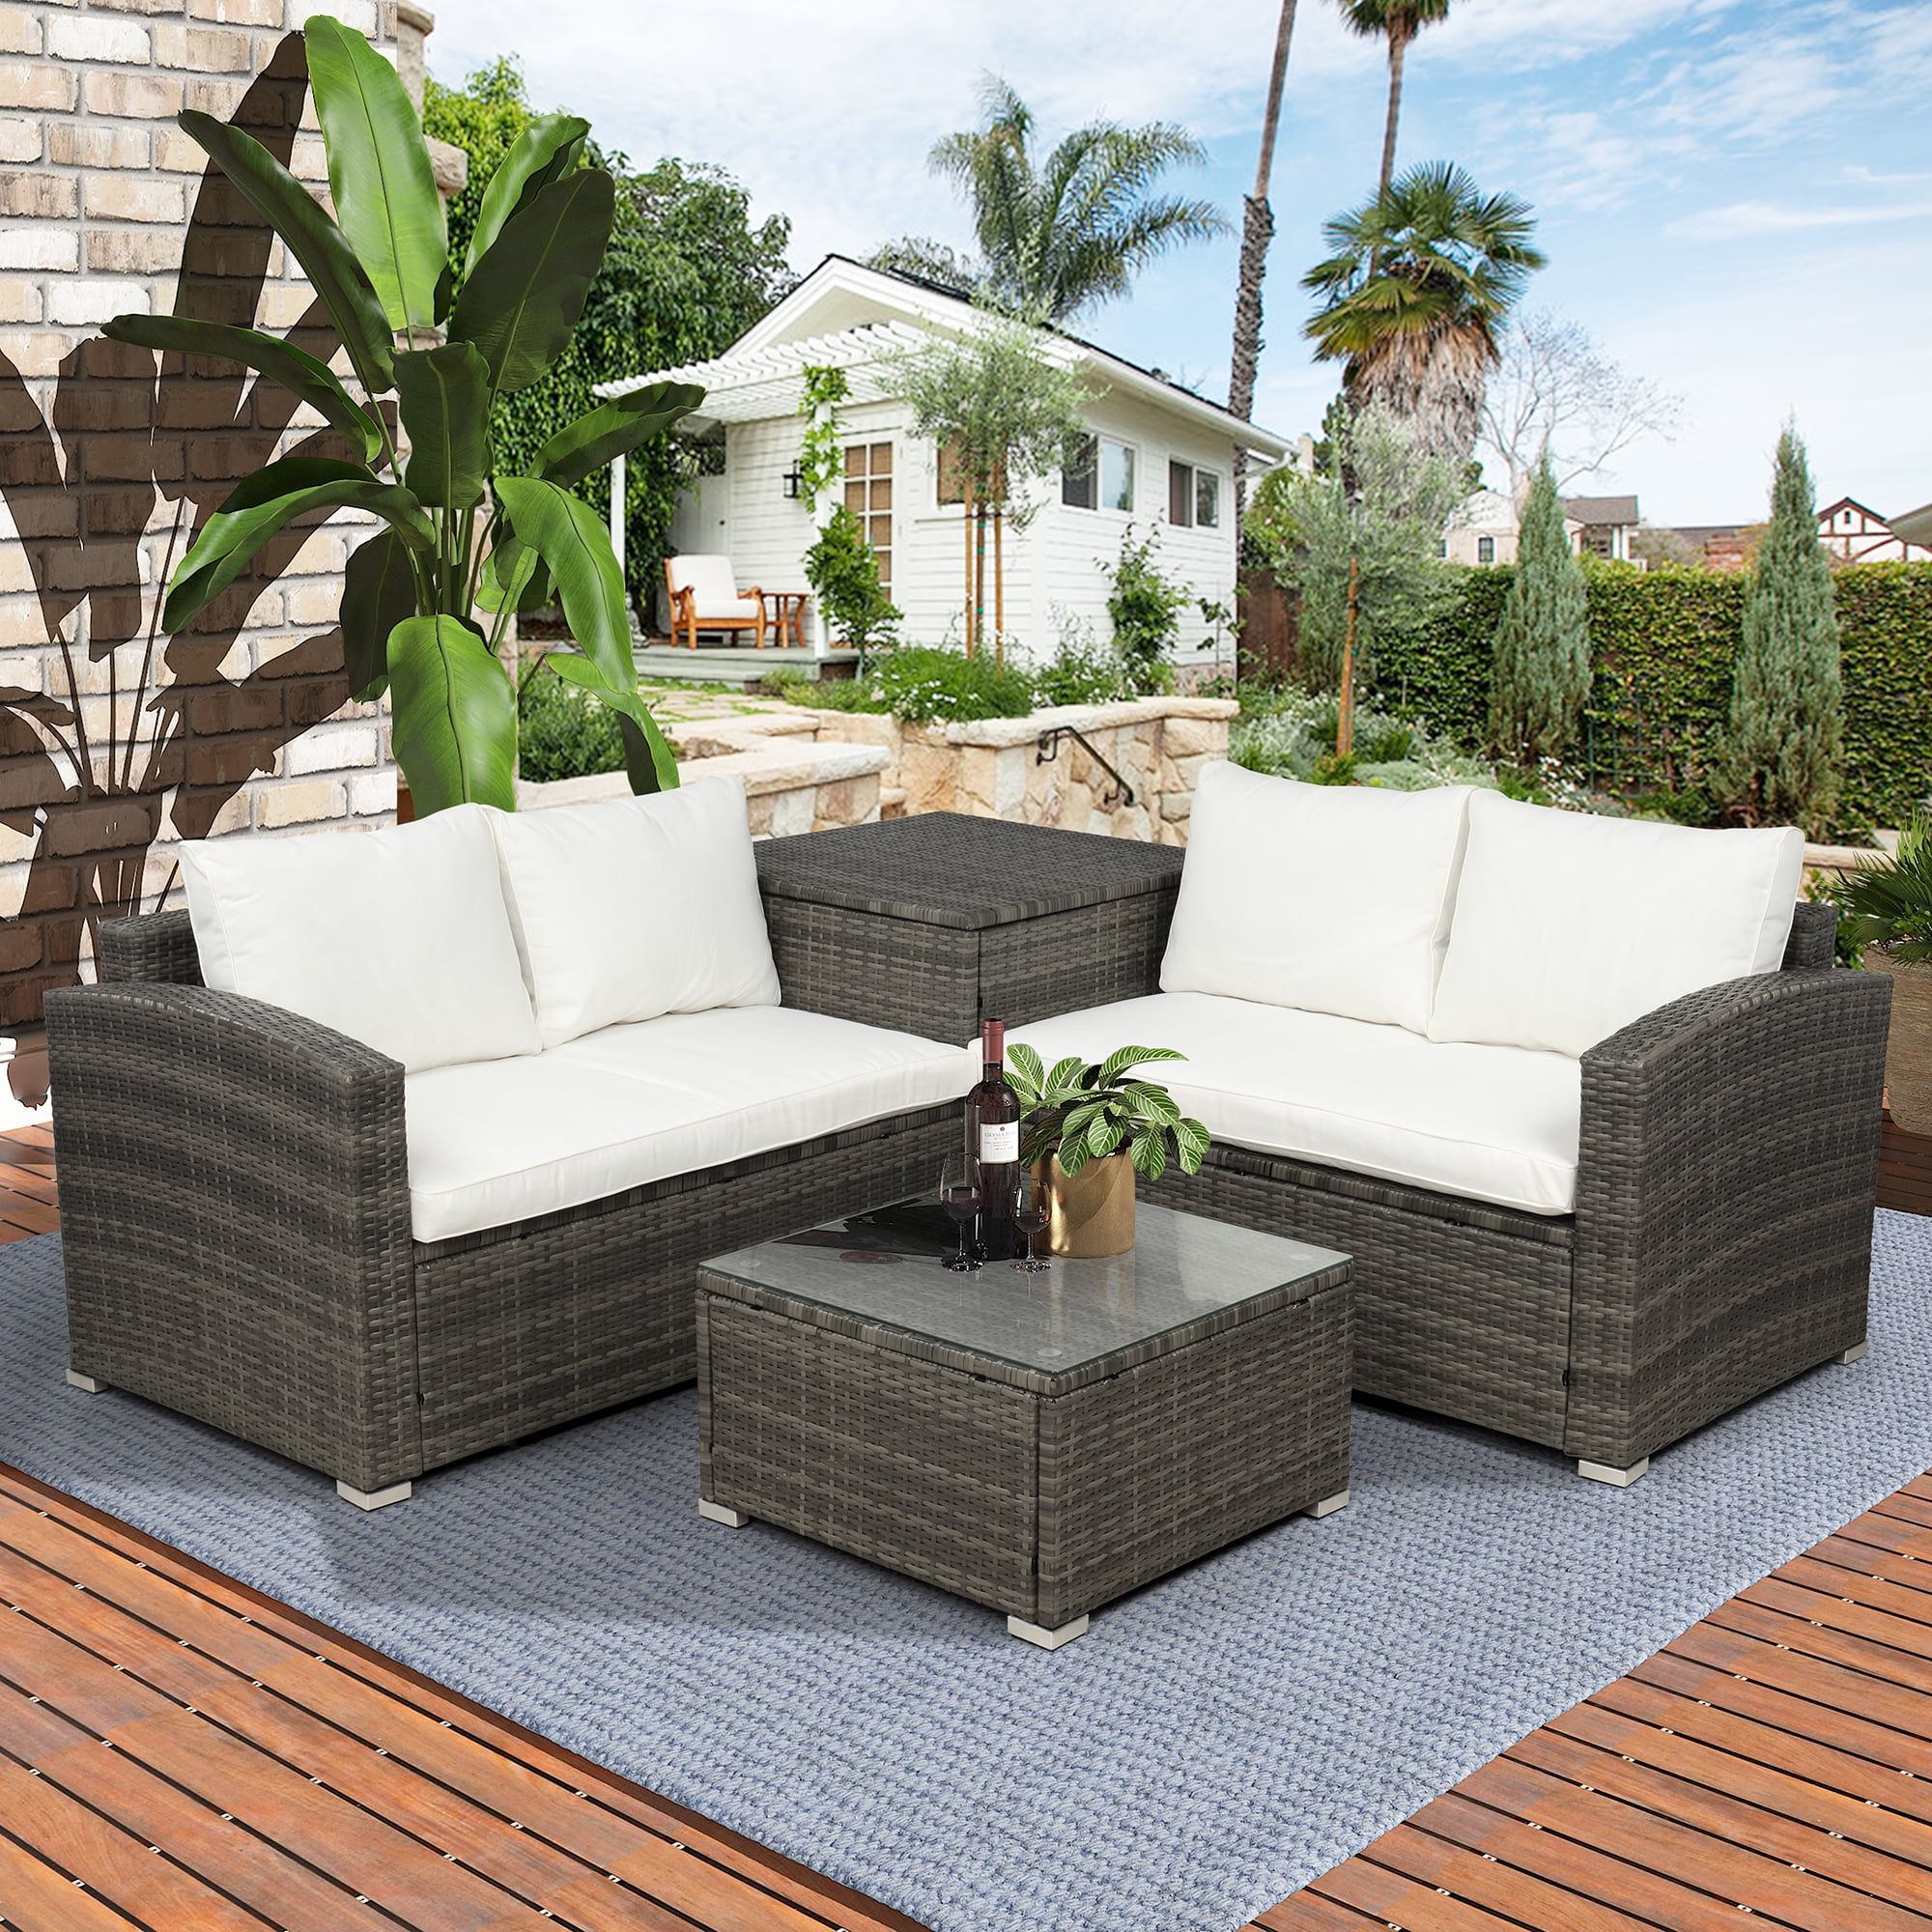 4 Piece Rattan Patio Furniture Sets, Wicker Bistro With Ottoman Coffee With 4pcs Rattan Patio Coffee Tables (Gallery 6 of 20)